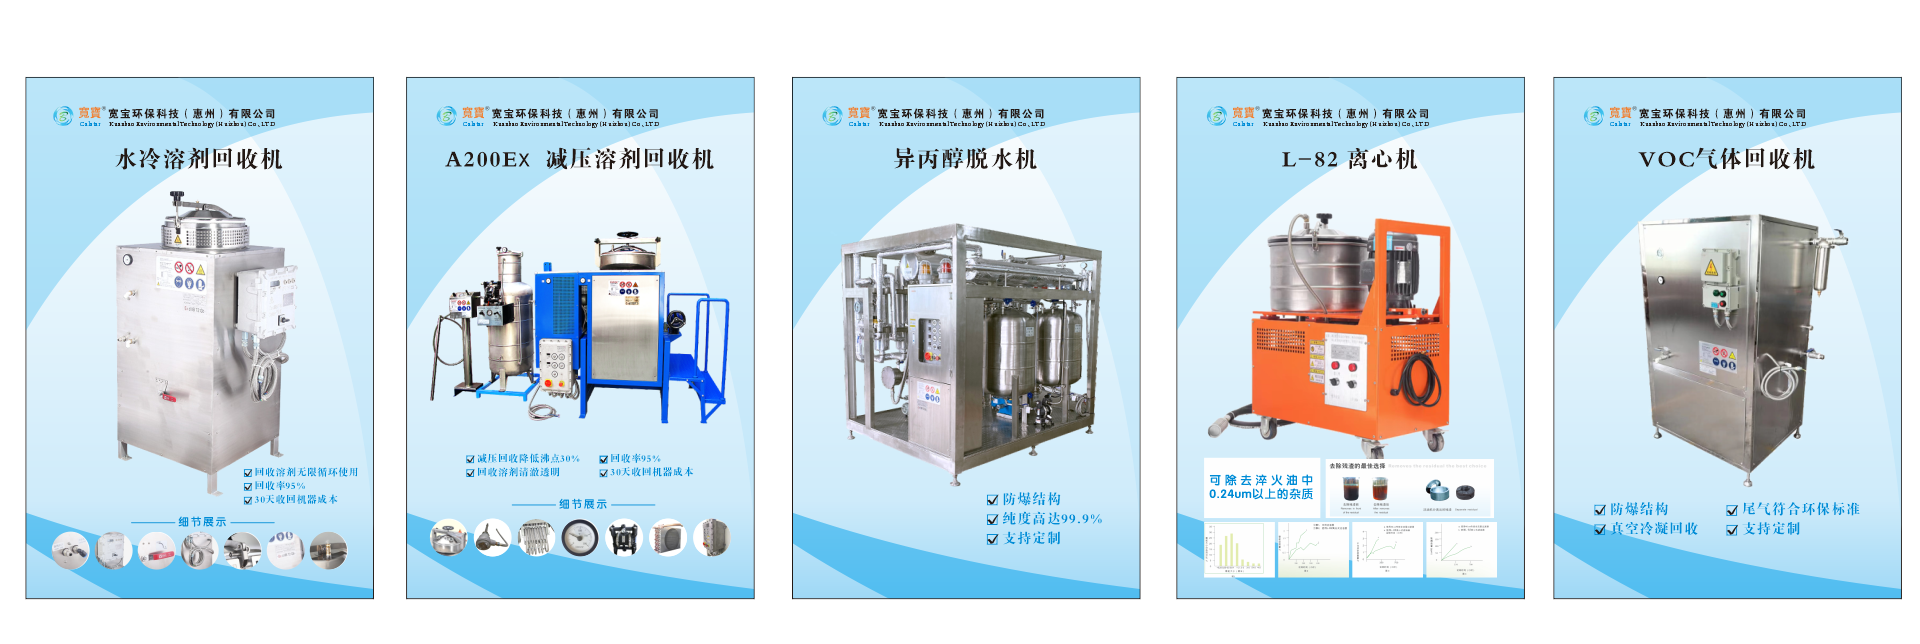 KUAN BAO solvent recovery machine.png